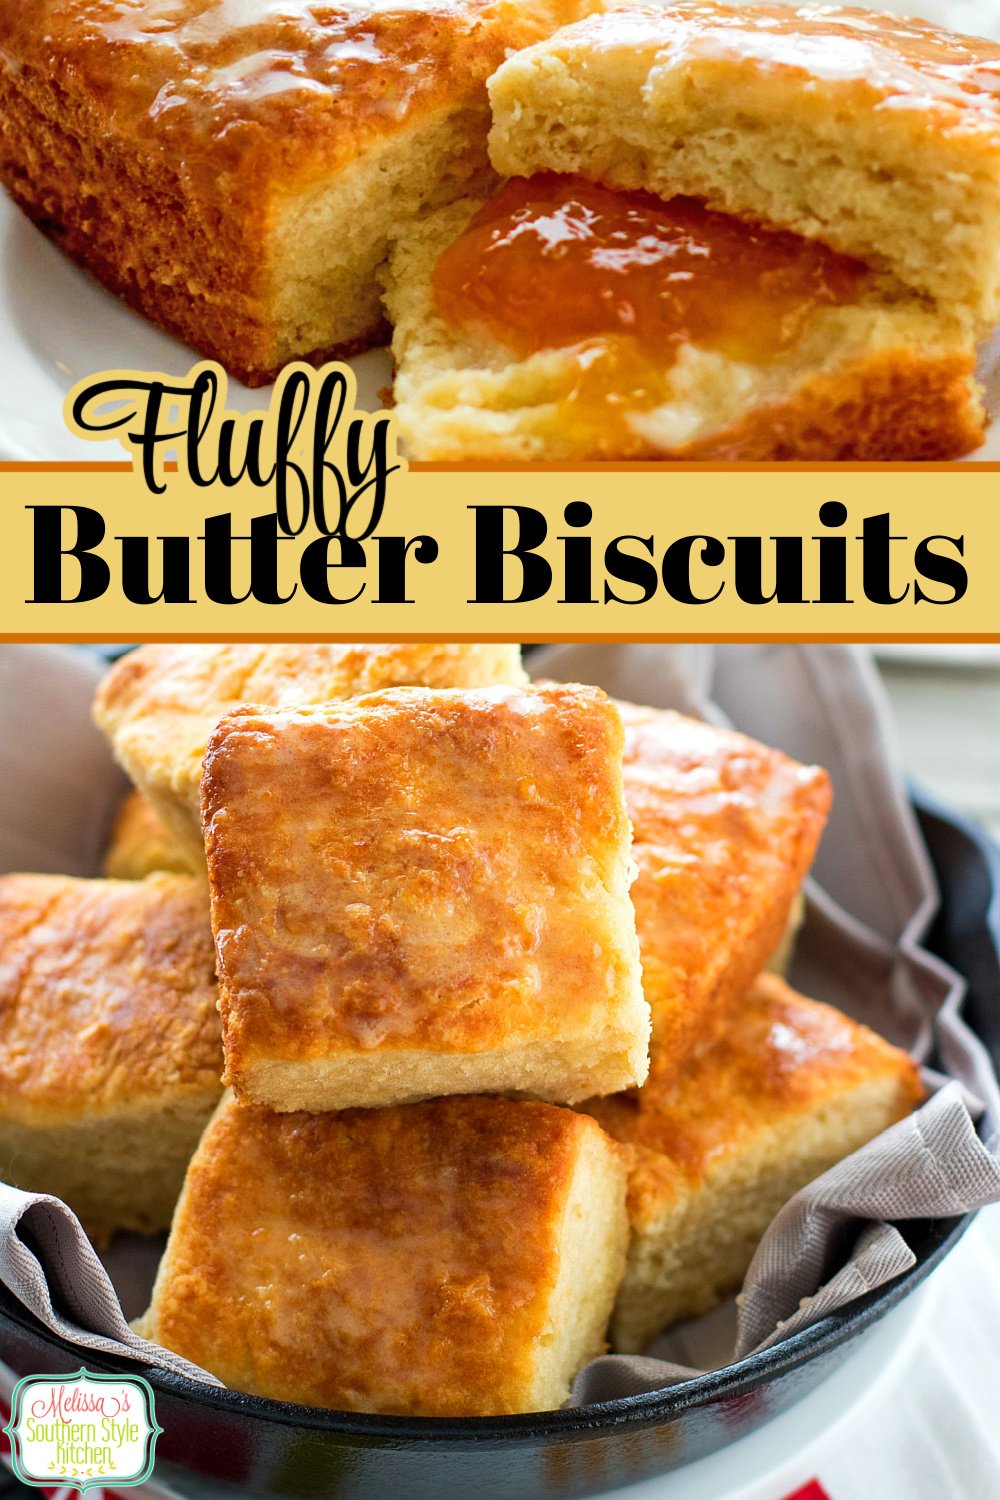 These buttery Fluffy Butter Biscuits are cut into squares using a knife, no biscuit cutter required! #biscuits #butterbiscuits #southernbiscuits #easyrecipes #buttermilkbiscuits #biscuitrecipes #southernfood #southernrecipes #breakfast #bread #brunch #holidayrecipes #holidaybrunchrecipes via @melissasssk